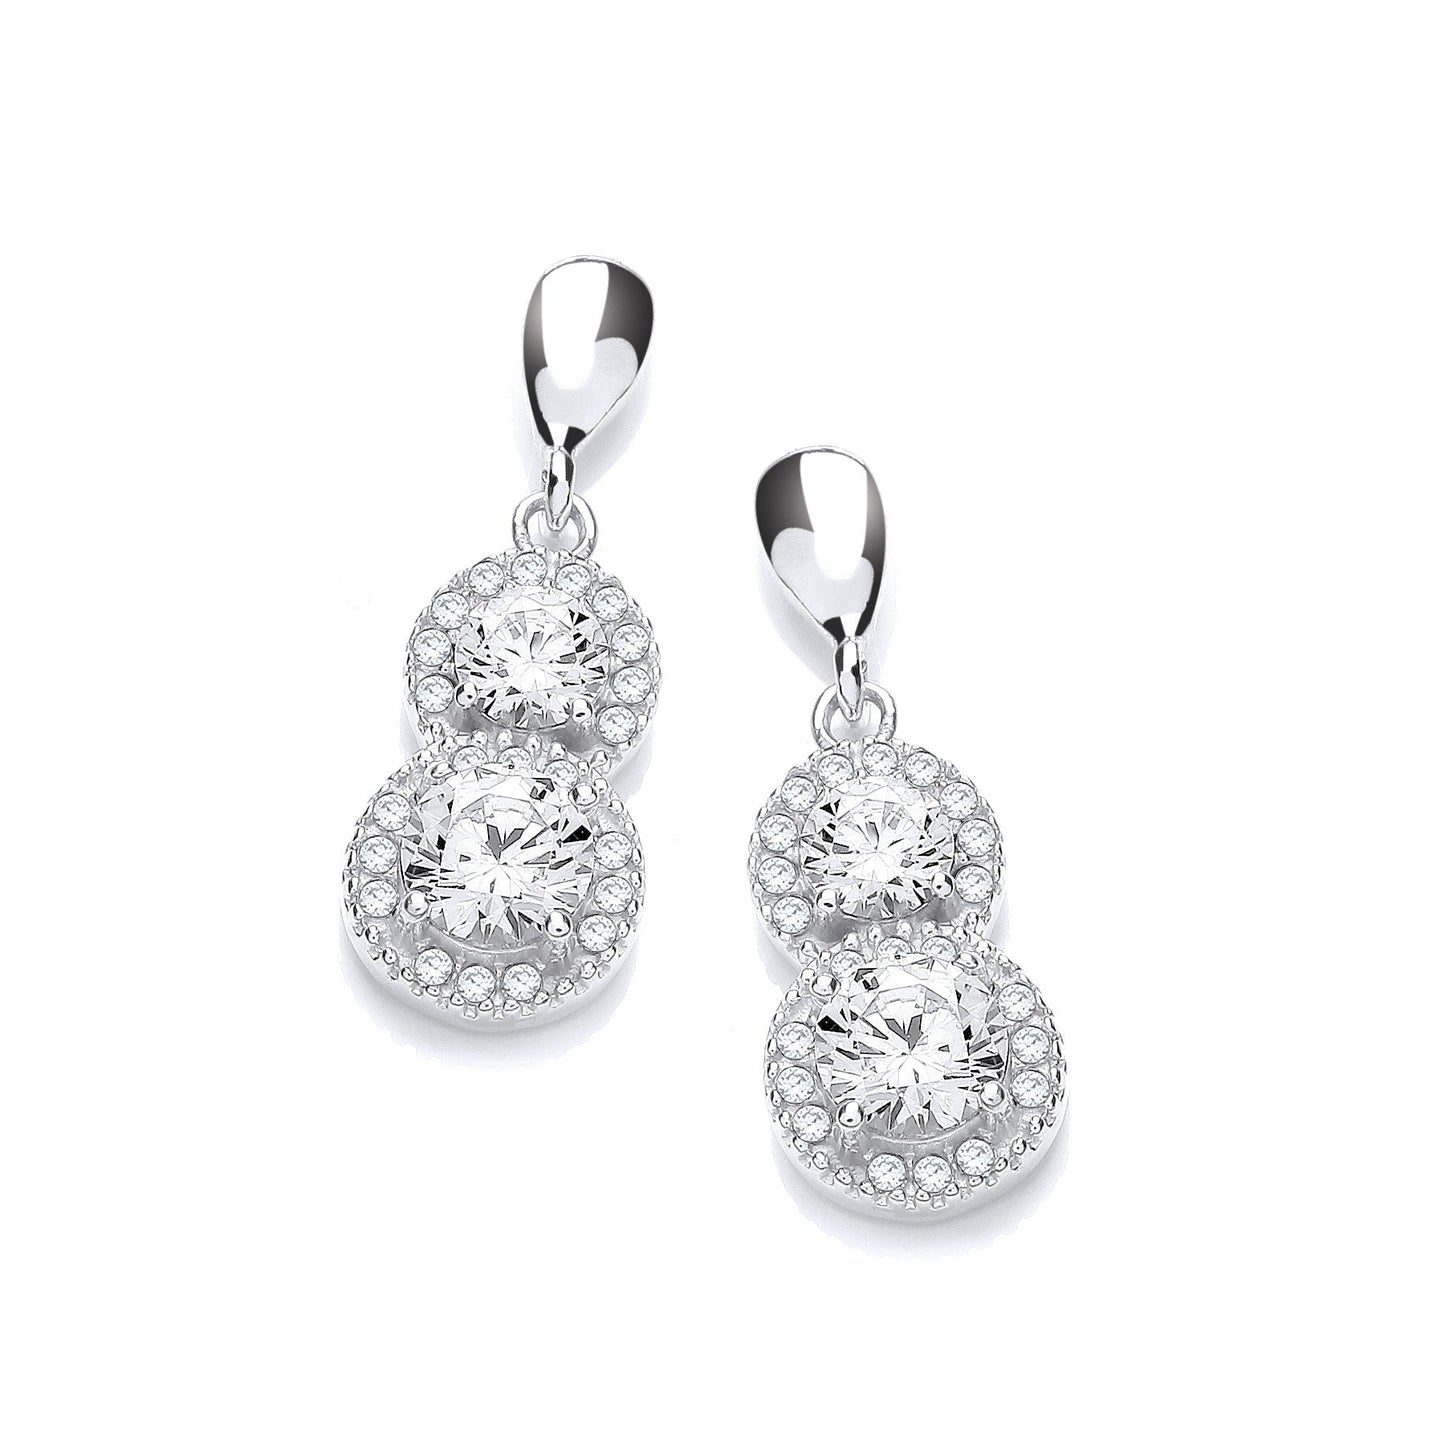 Drop 925 Sterling Silver Cluster Earrings Set With CZs - FJewellery